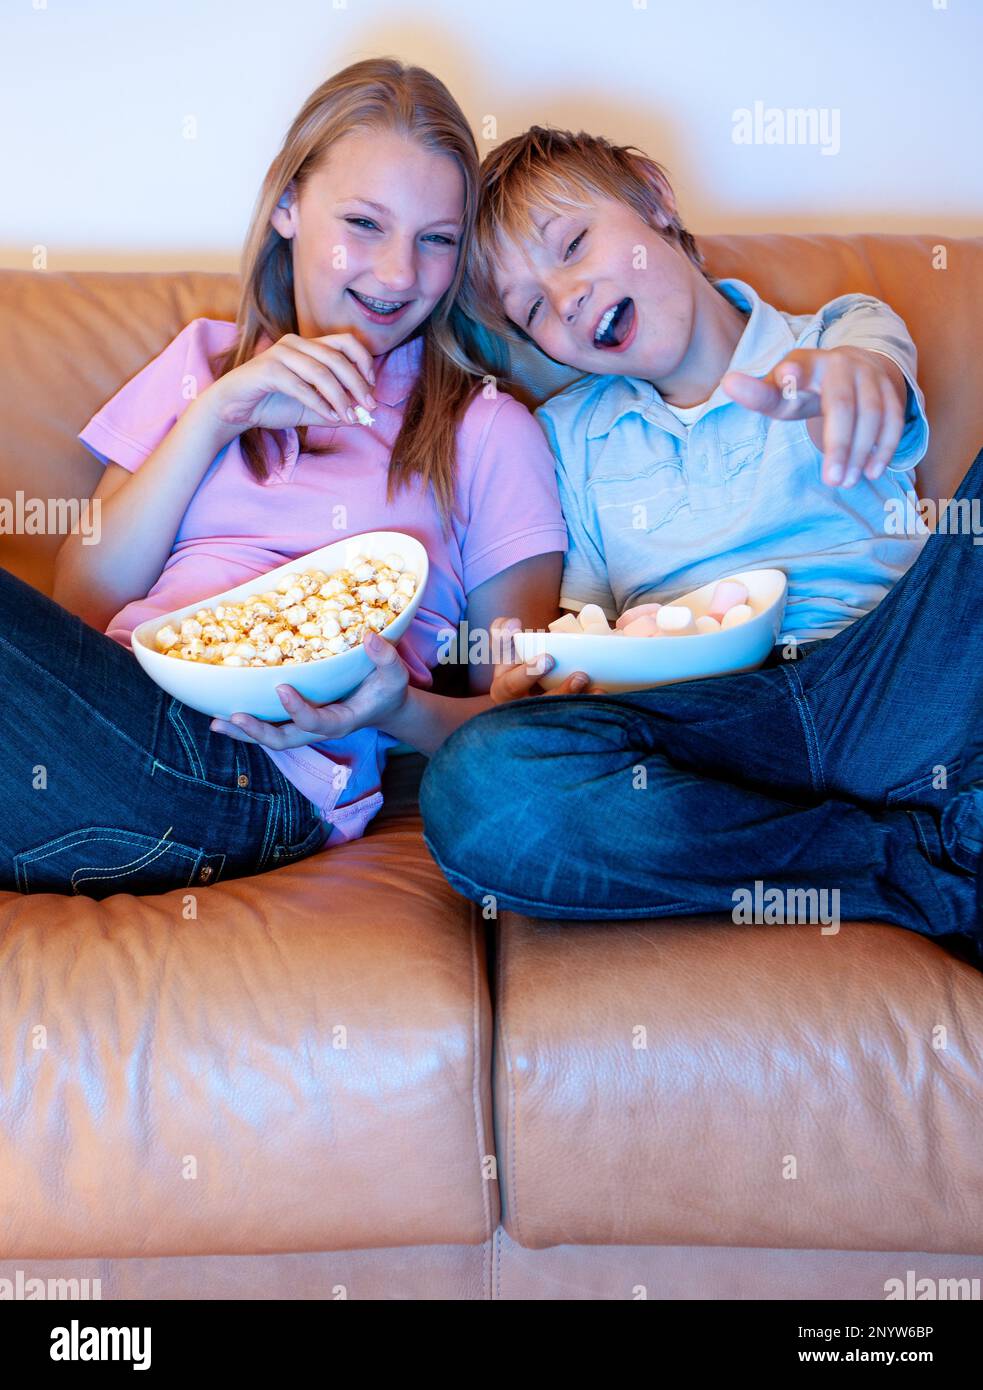 Family Life, Watching TV. Candid and carefree siblings enjoying sharing snacks and their favourite television show. From a series of related images. Stock Photo